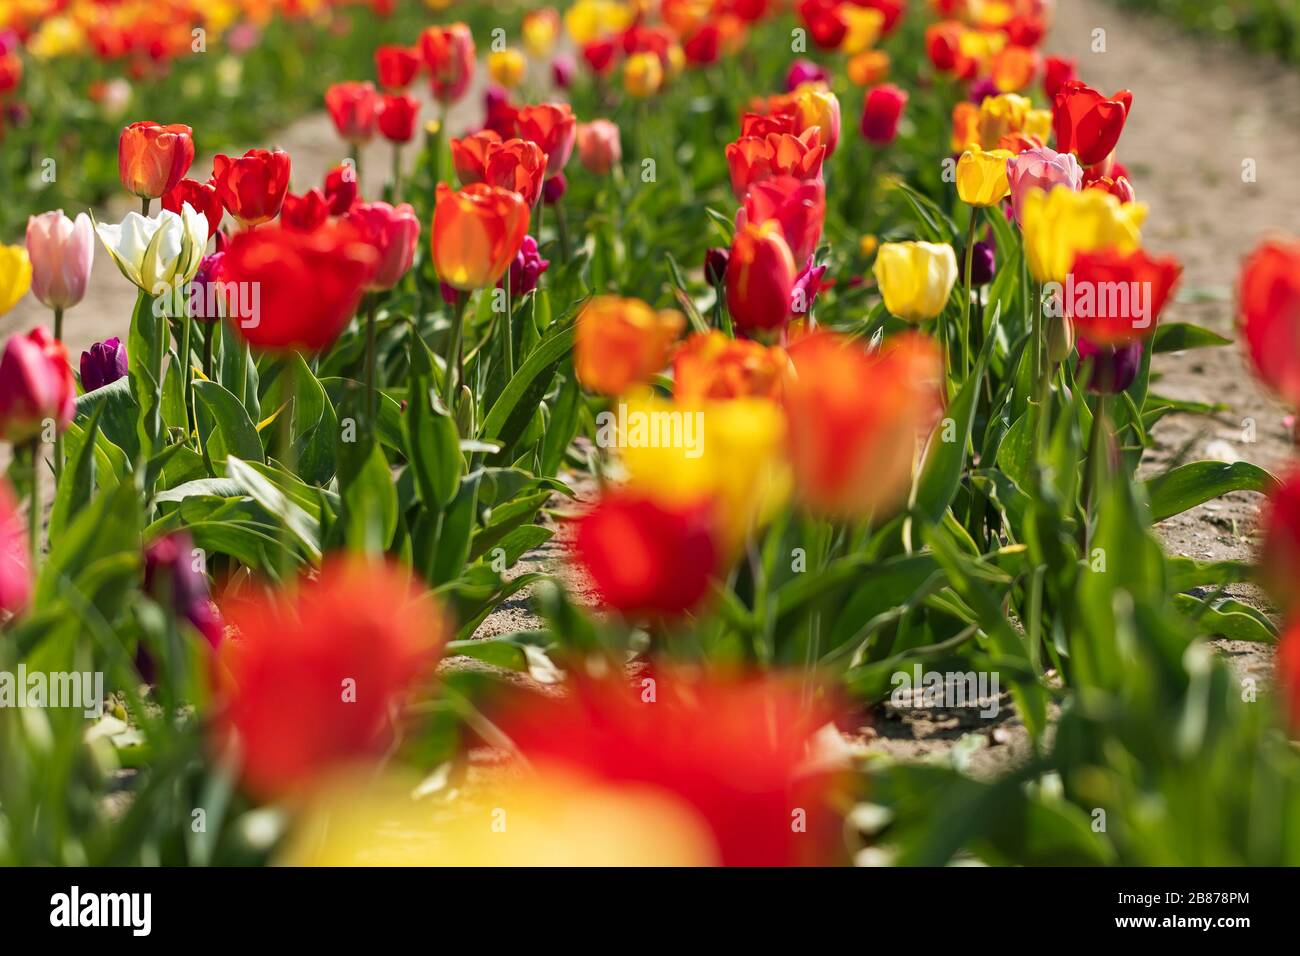 Colorful tulip field in the sunshine. Yellow, red, pink and white tulips in the back light, Germany. Backlit photography Stock Photo